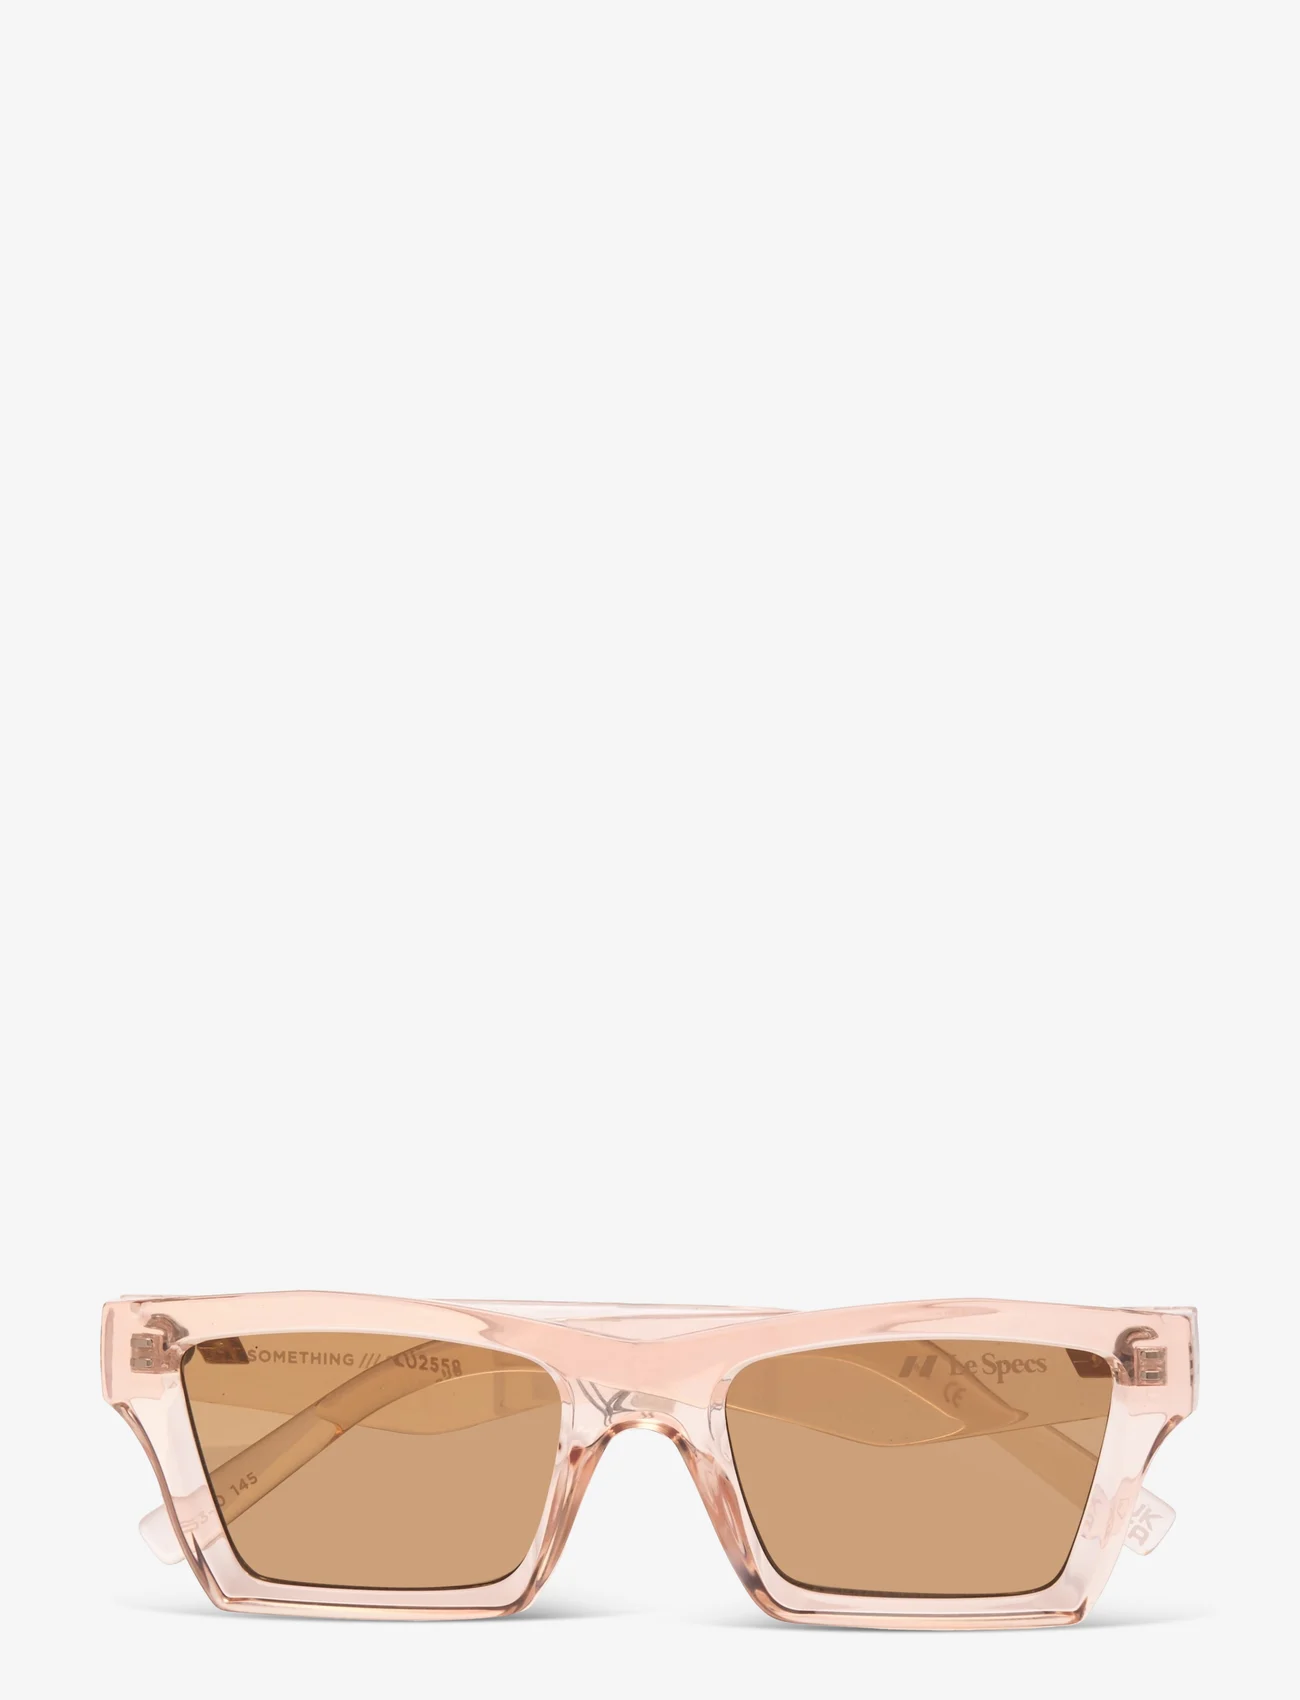 Le Specs - SOMETHING - pink champagne w/ tan tint lens - 0